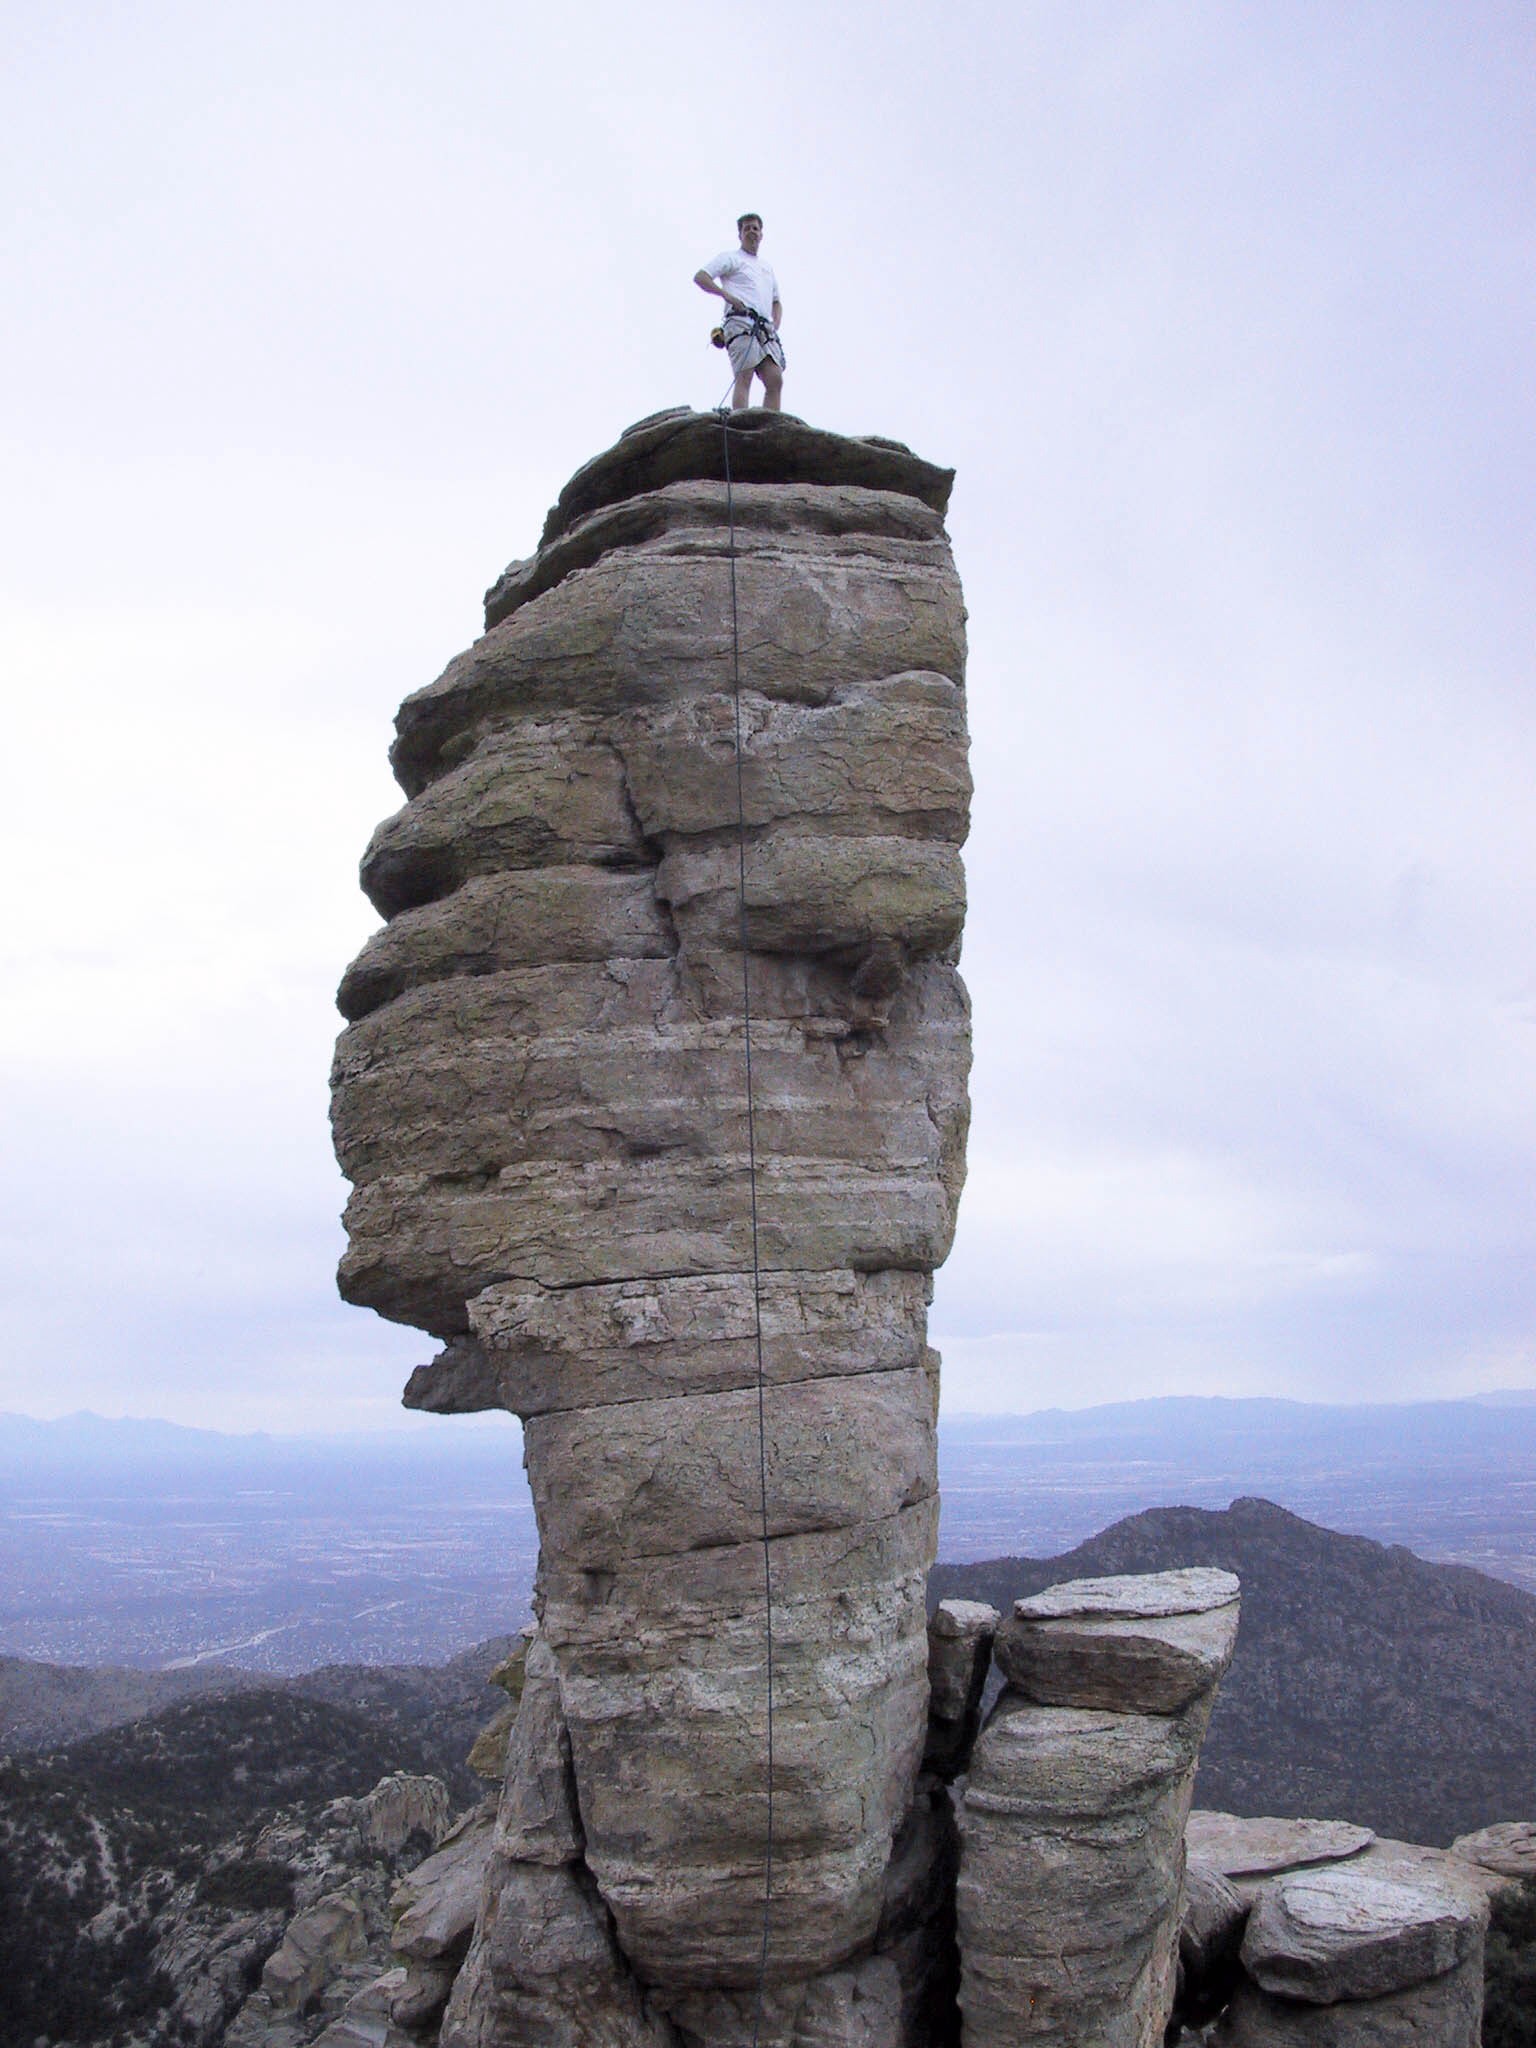 Glory days. Hitchcock Pinnacle, Mt Lemmon. Super easy but awesome views.